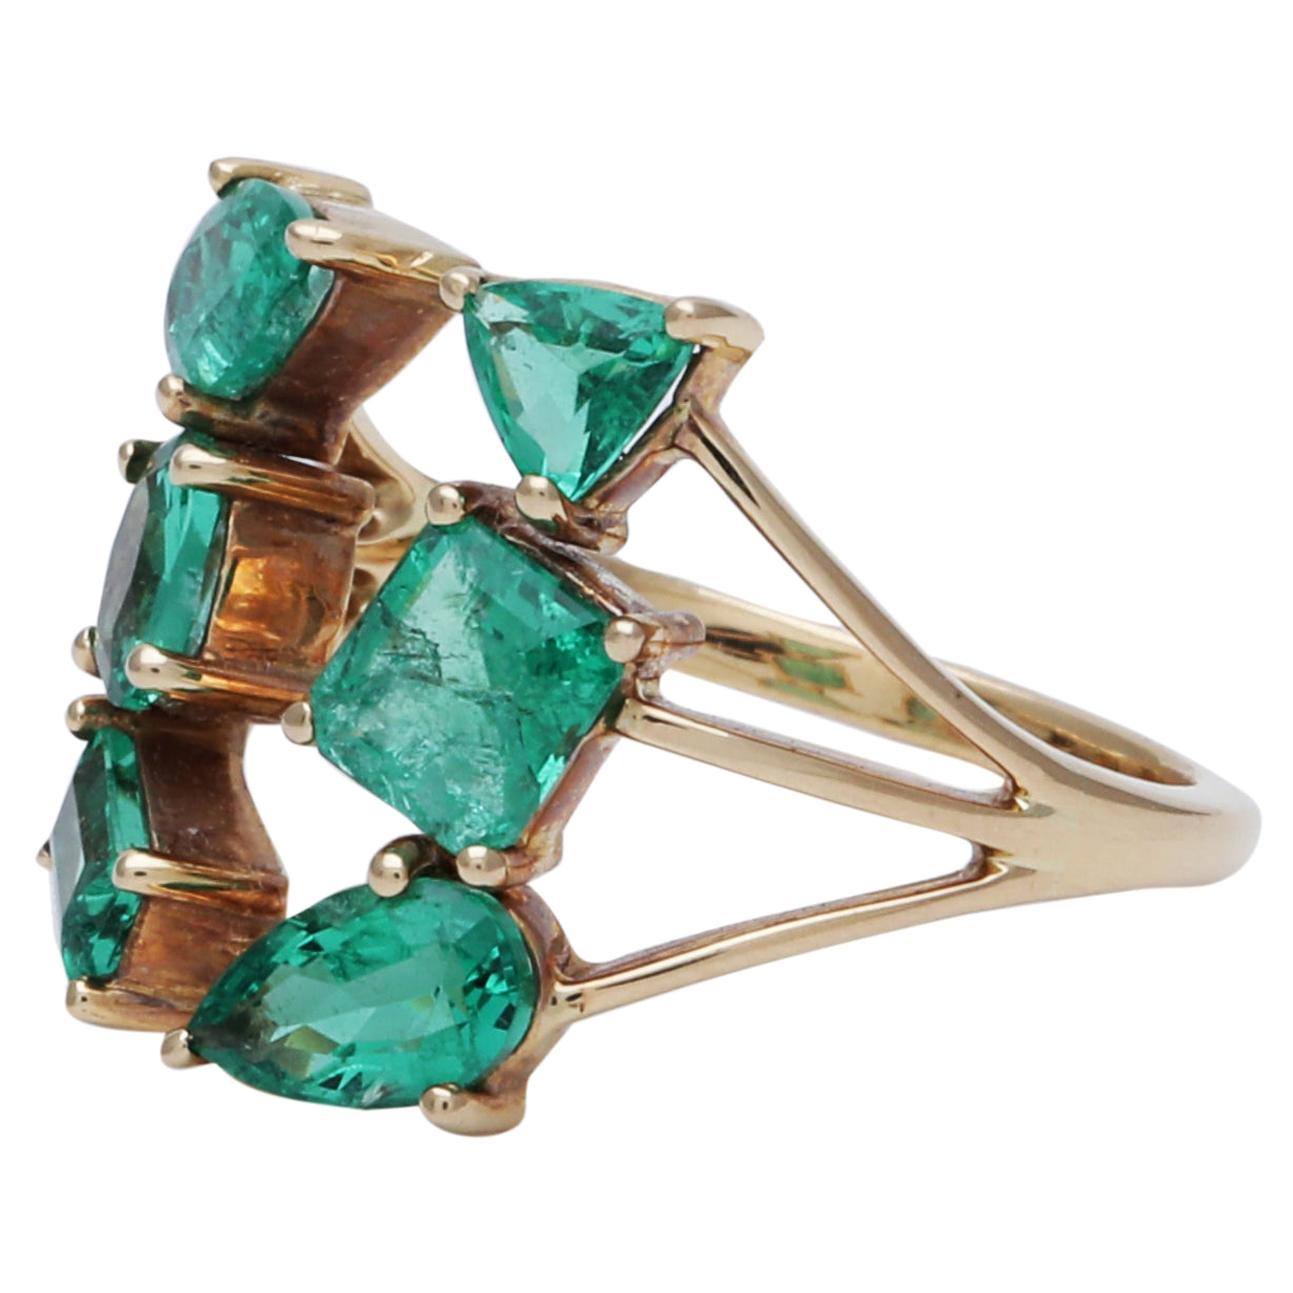 Fancy 6-Stone Emerald Cocktail Ring Handcrafted in 18 Karat Yellow Gold 